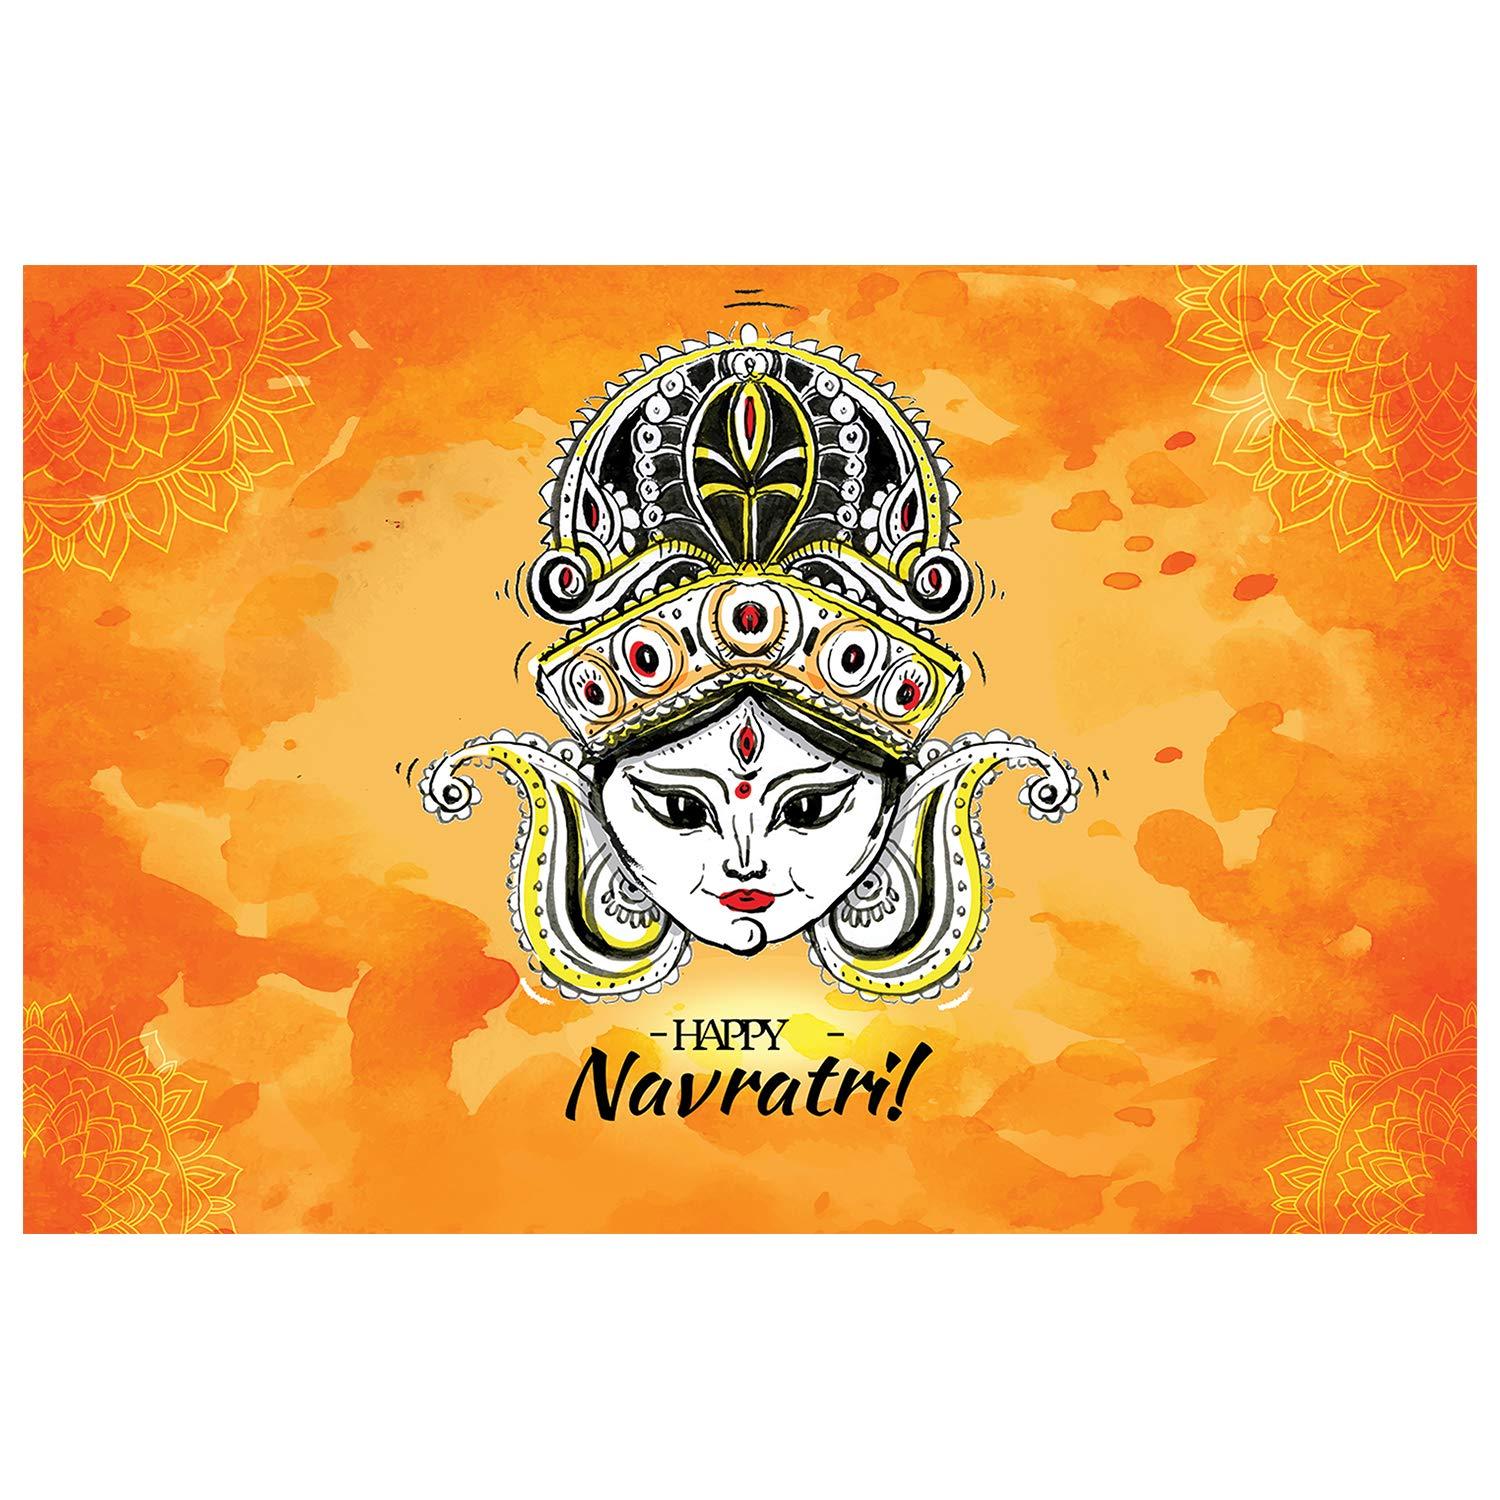 Happy Navratri Wallpaper HD Images for Facebook WhatsApp